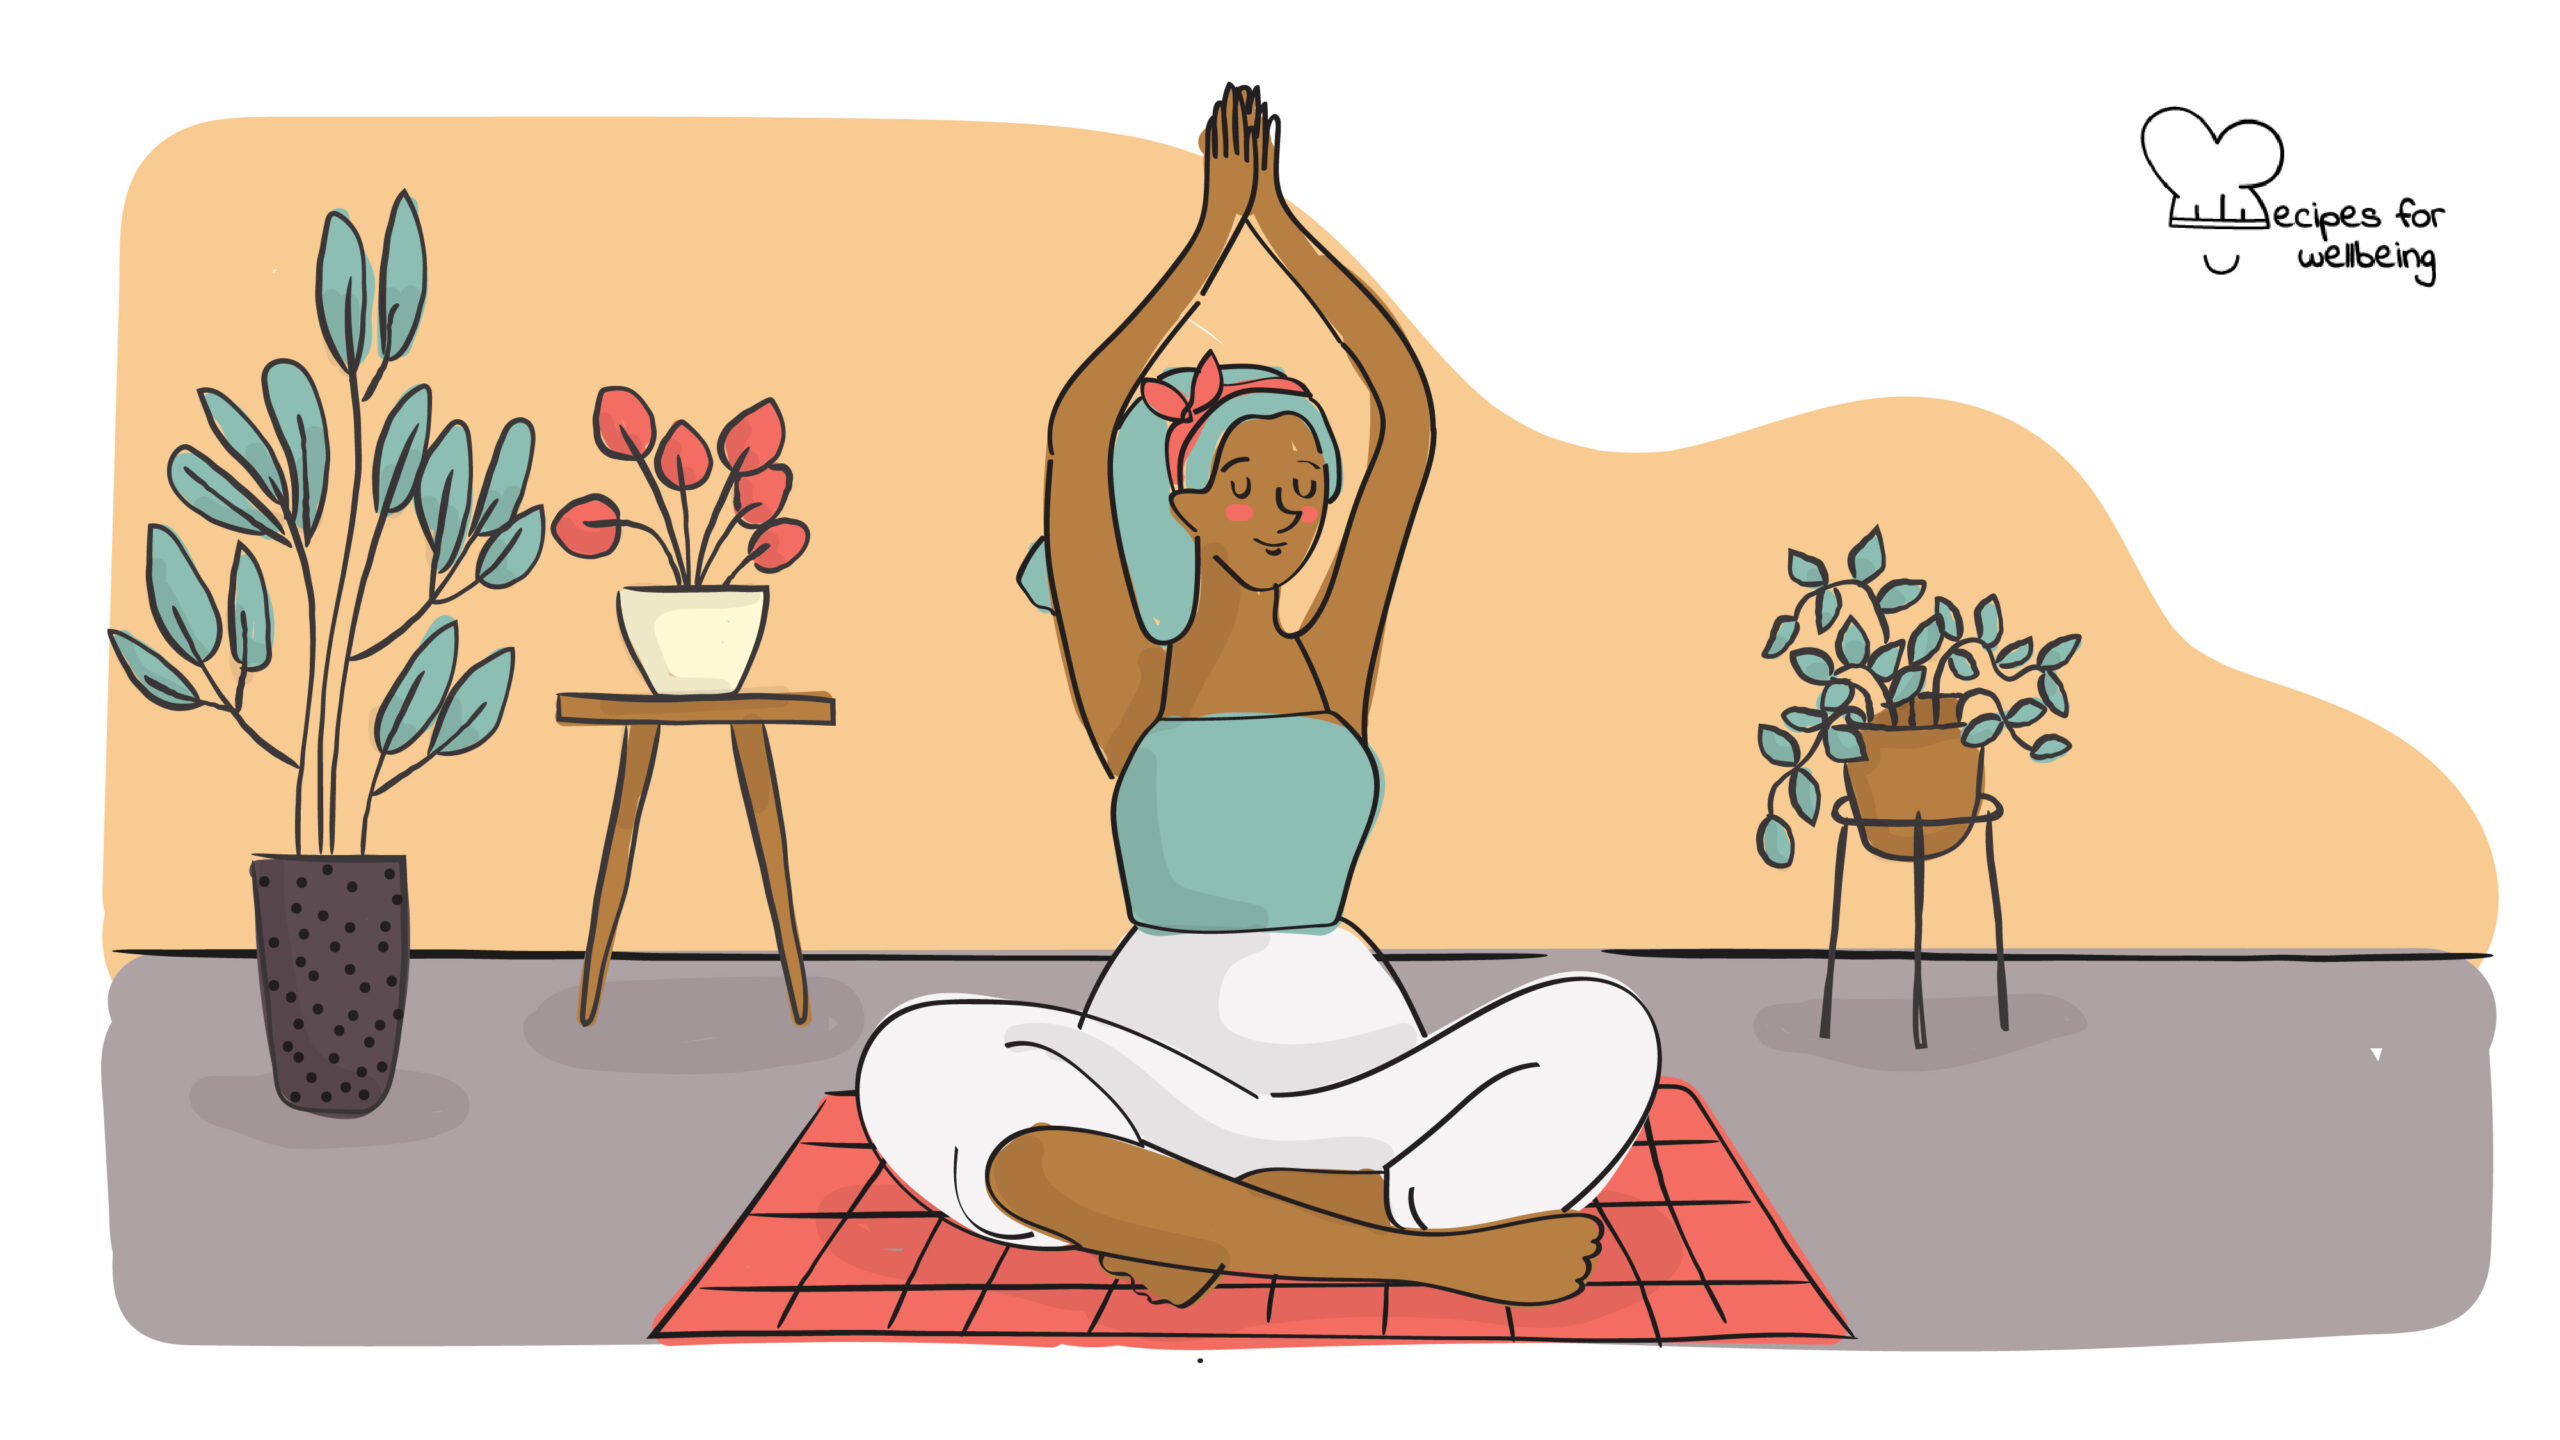 Illustration of a person sitting cross-legged on the floor in a meditative pose. © Recipes for Wellbeing